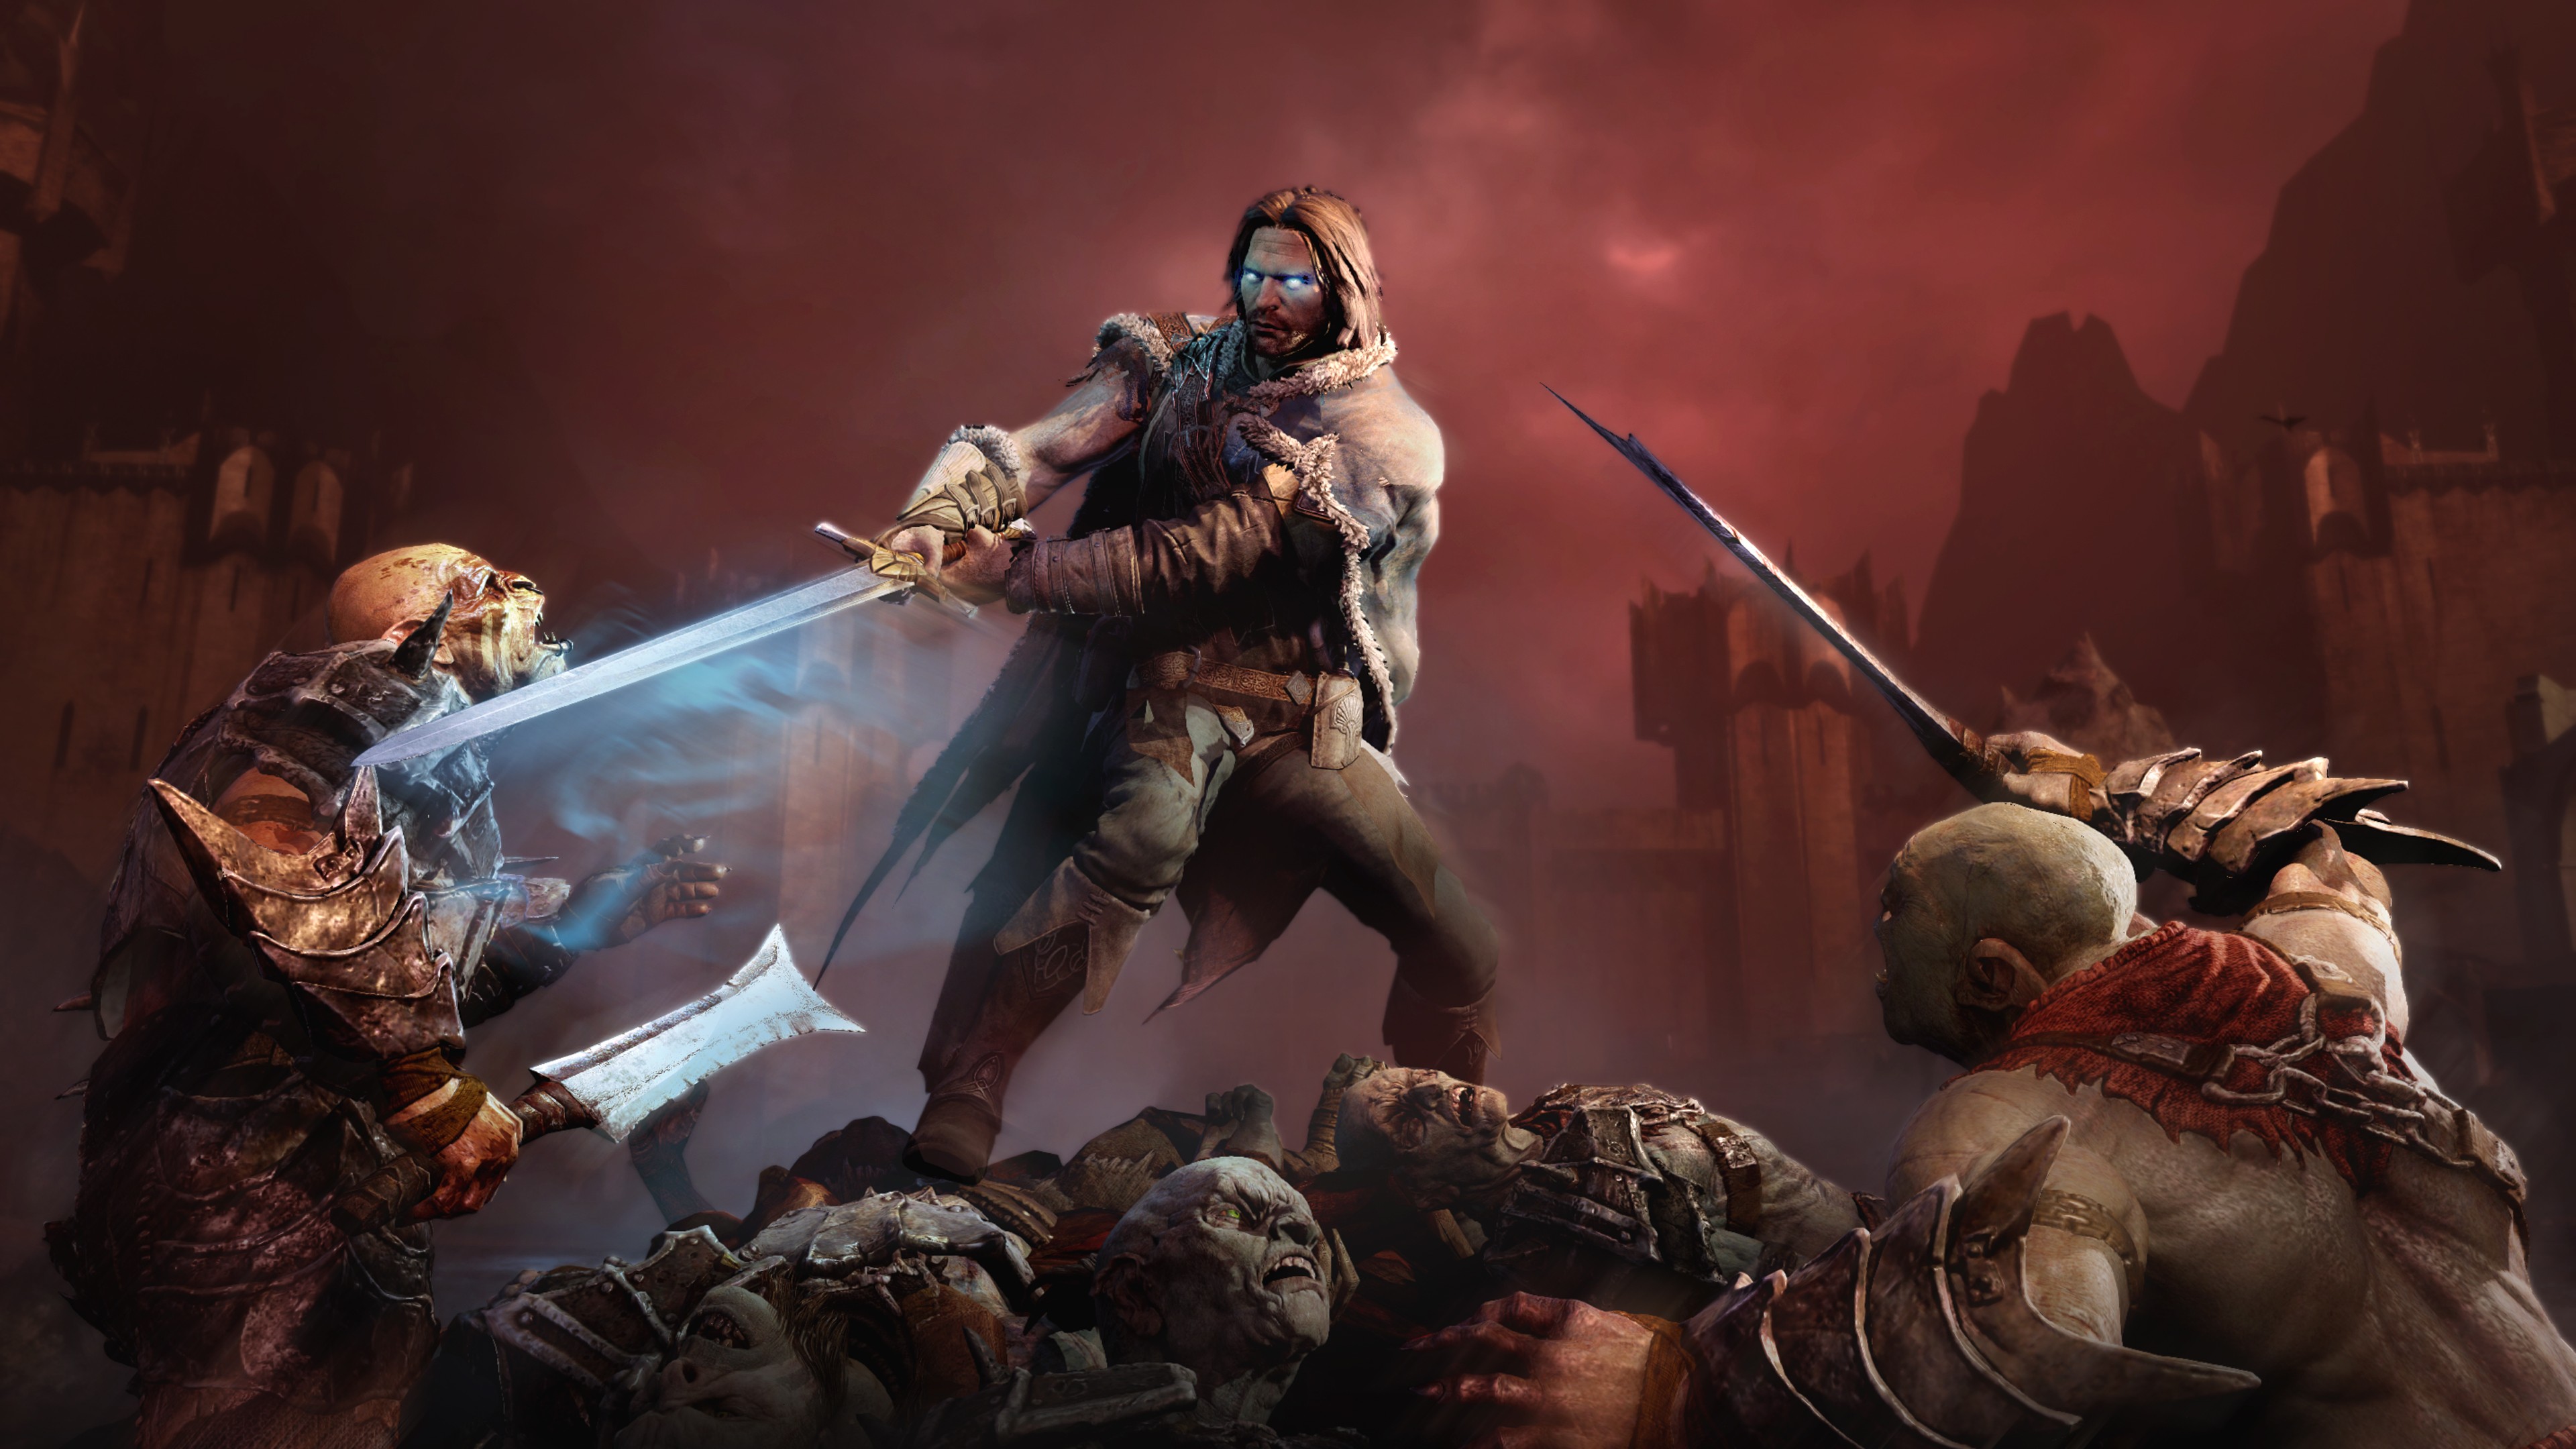 Middle-earth: Shadow of Mordor 'Weapons and Runes' gameplay - Gematsu